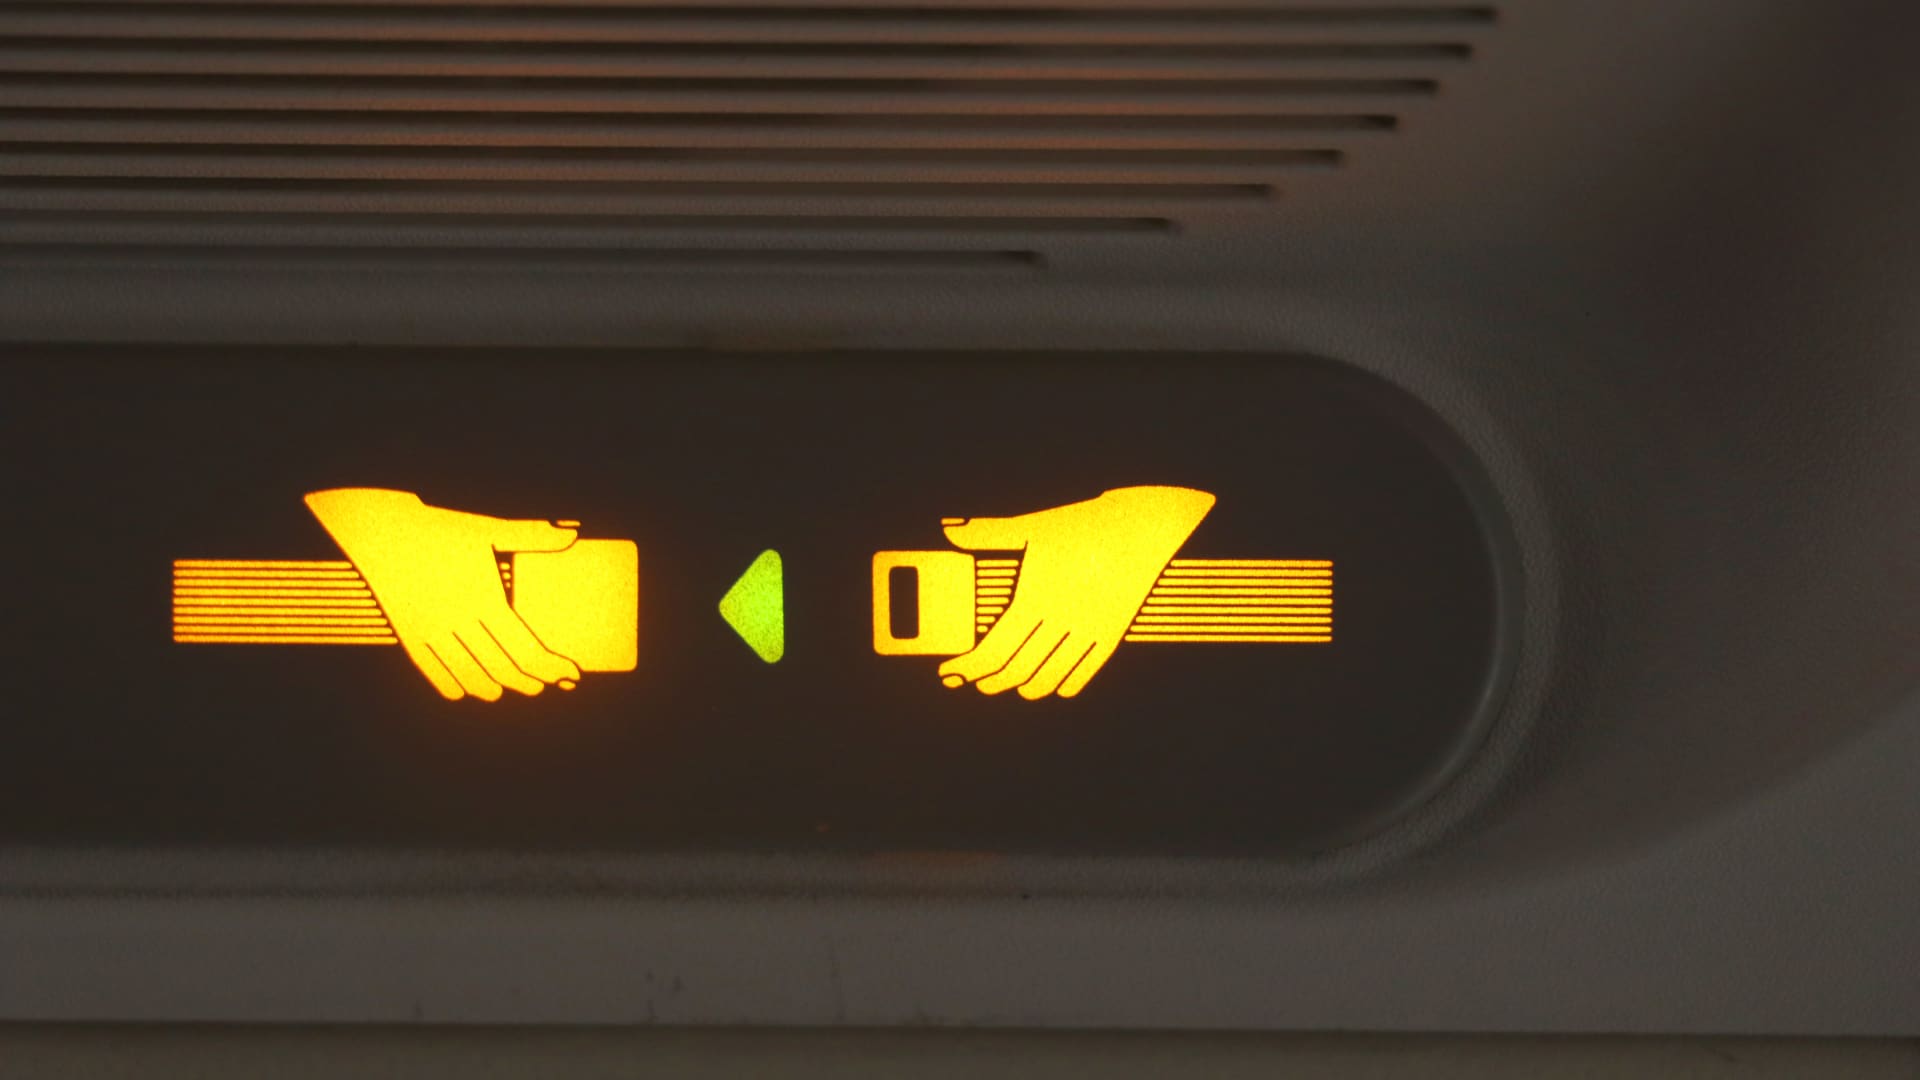 Aircraft passengers are required to fasten their seatbelt when the sign is illuminated, and advised to keep it secured for the duration of a flight.